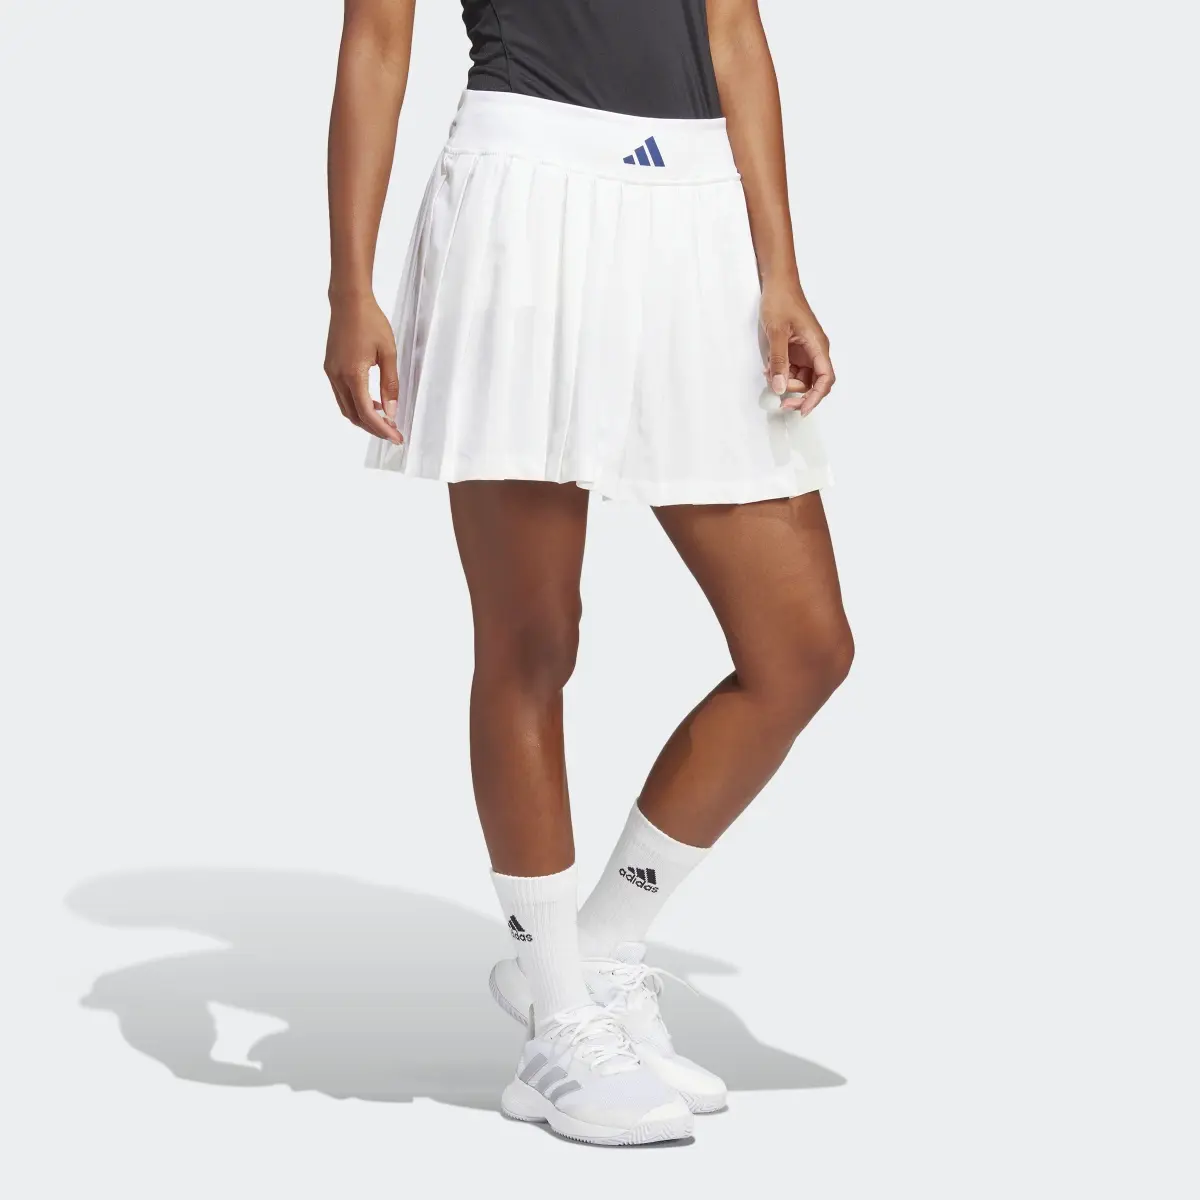 Adidas Clubhouse Premium Classic Tennis Pleated Skirt. 3